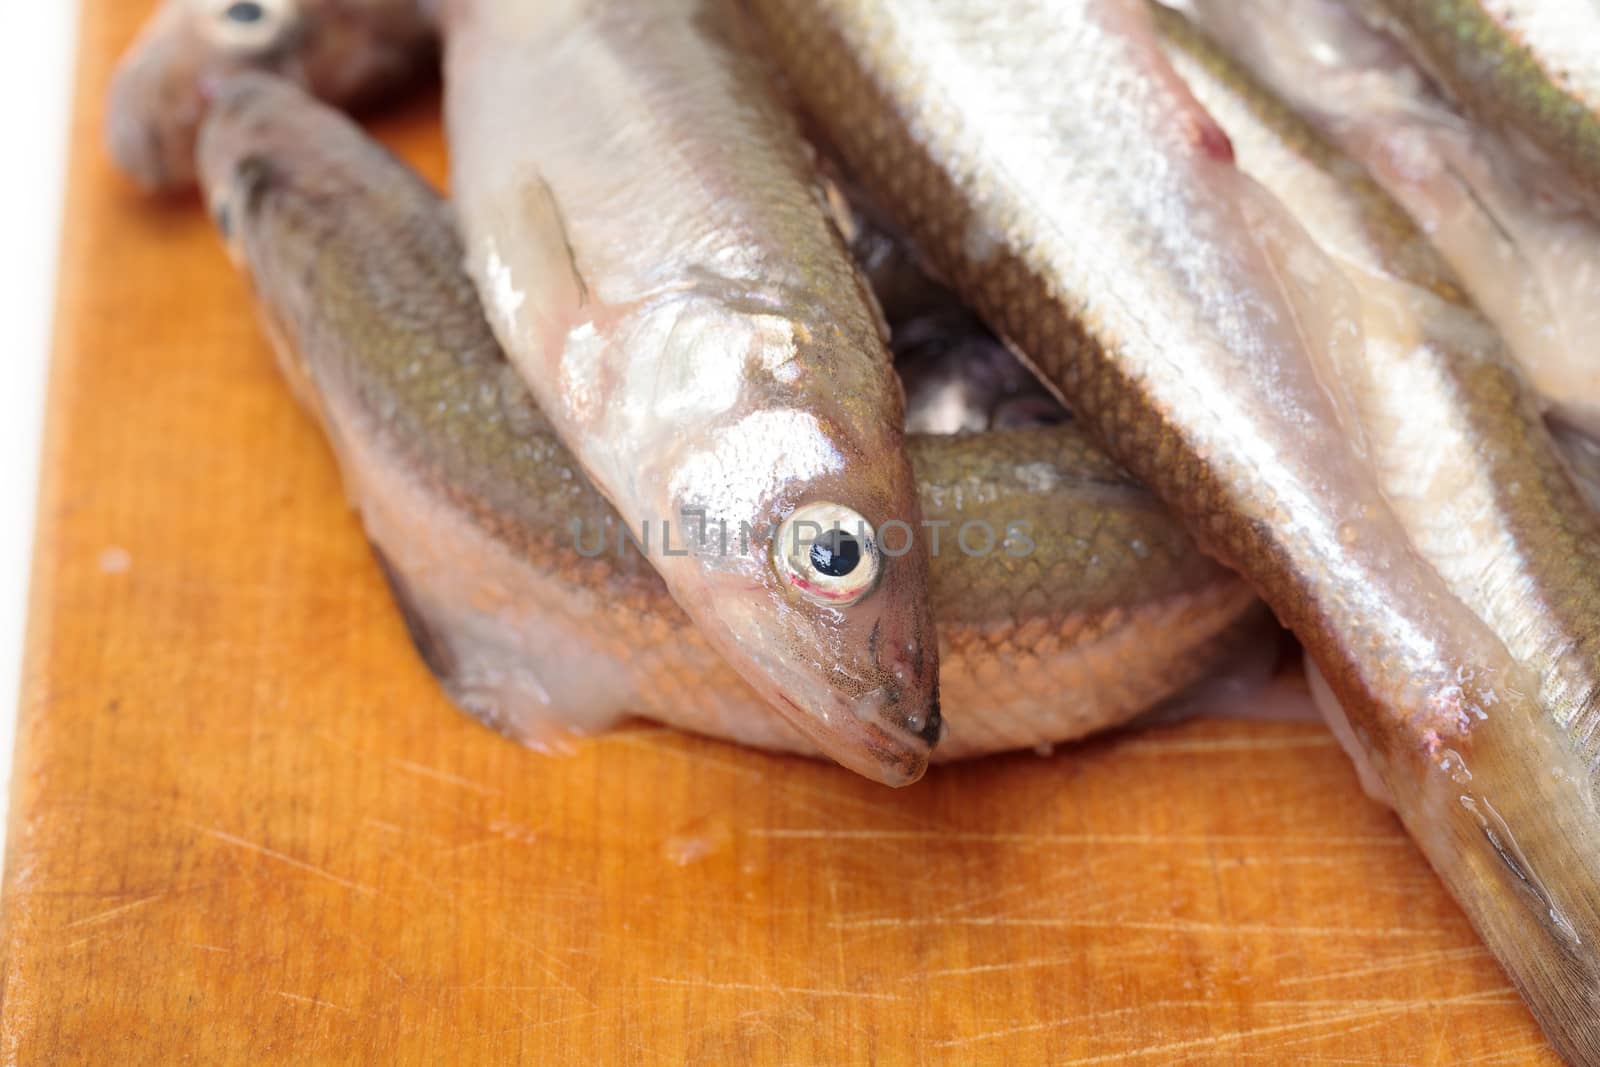 Fresh smelts fish on wooden cutting board